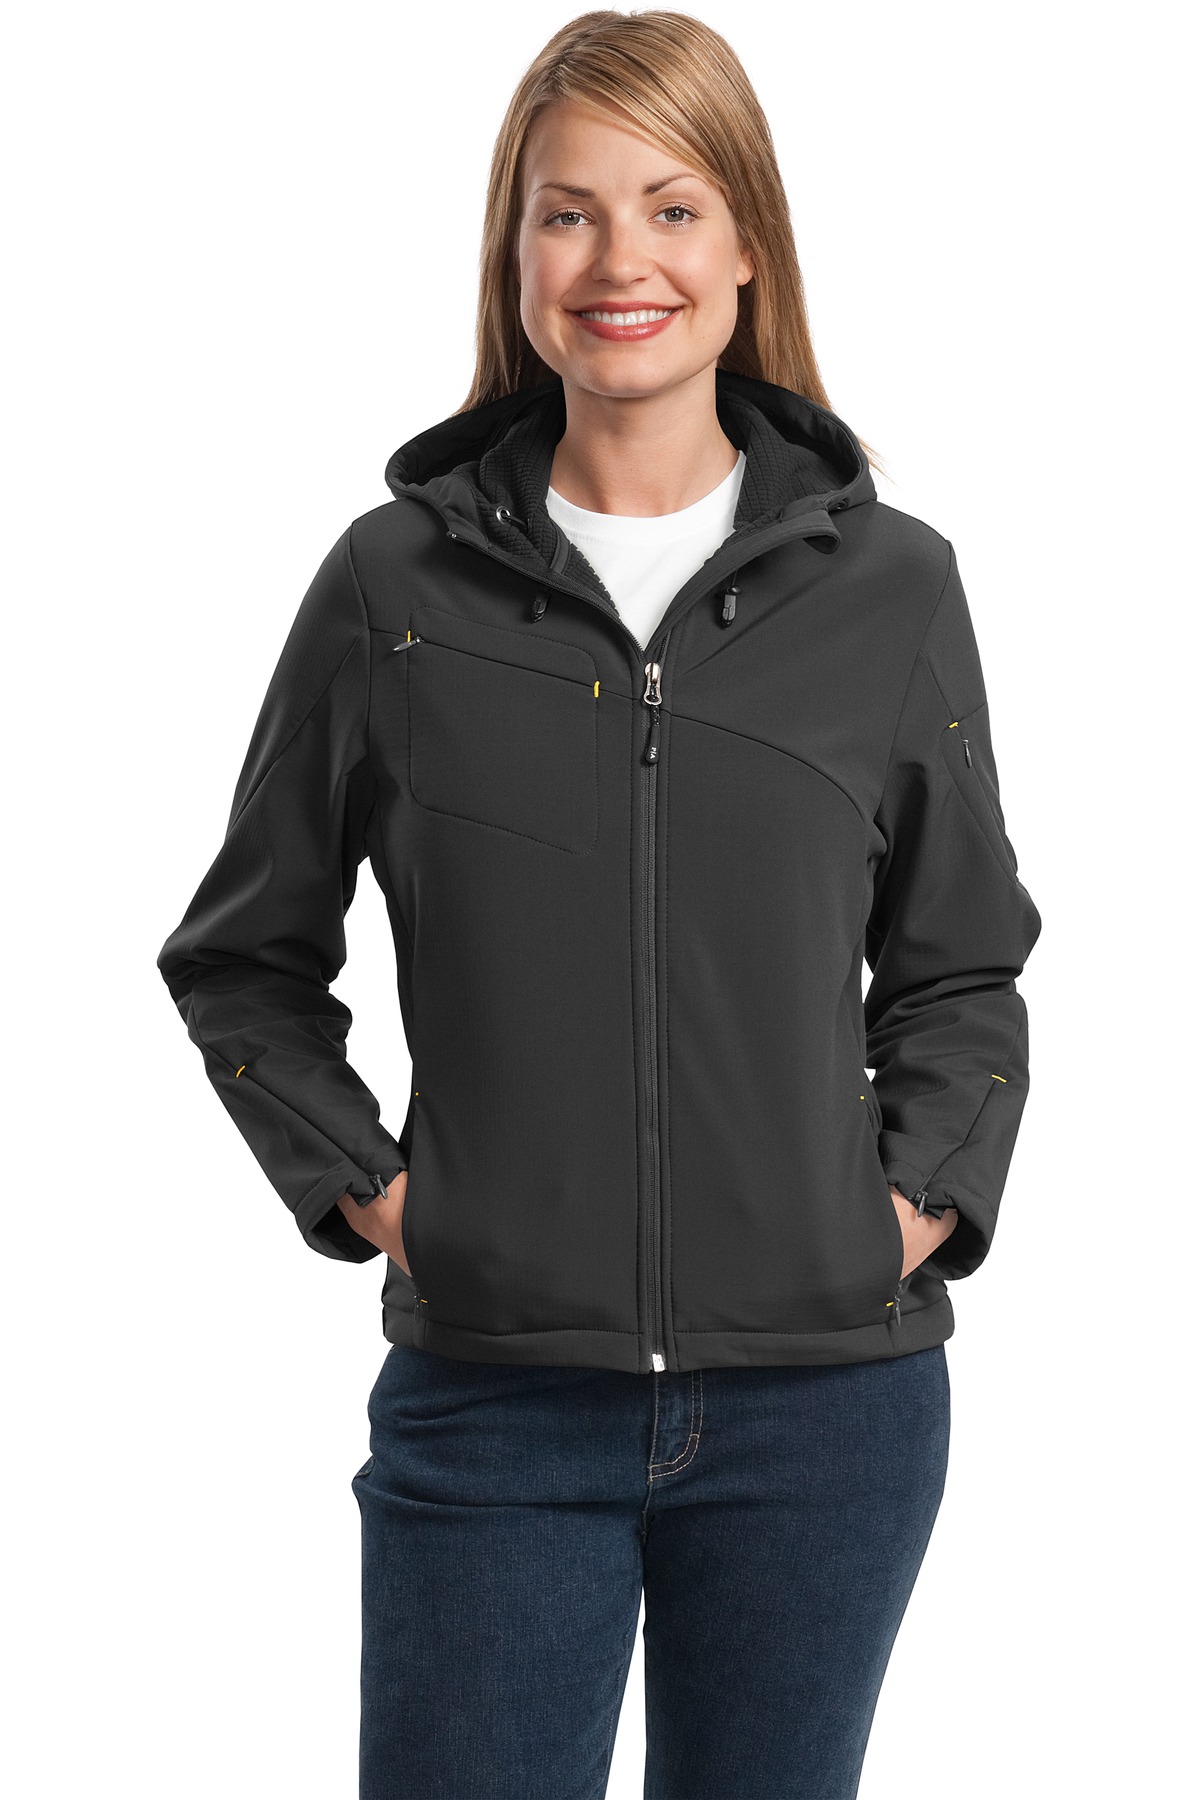 Textured Hooded Soft Shell Jacket - image 1 of 2